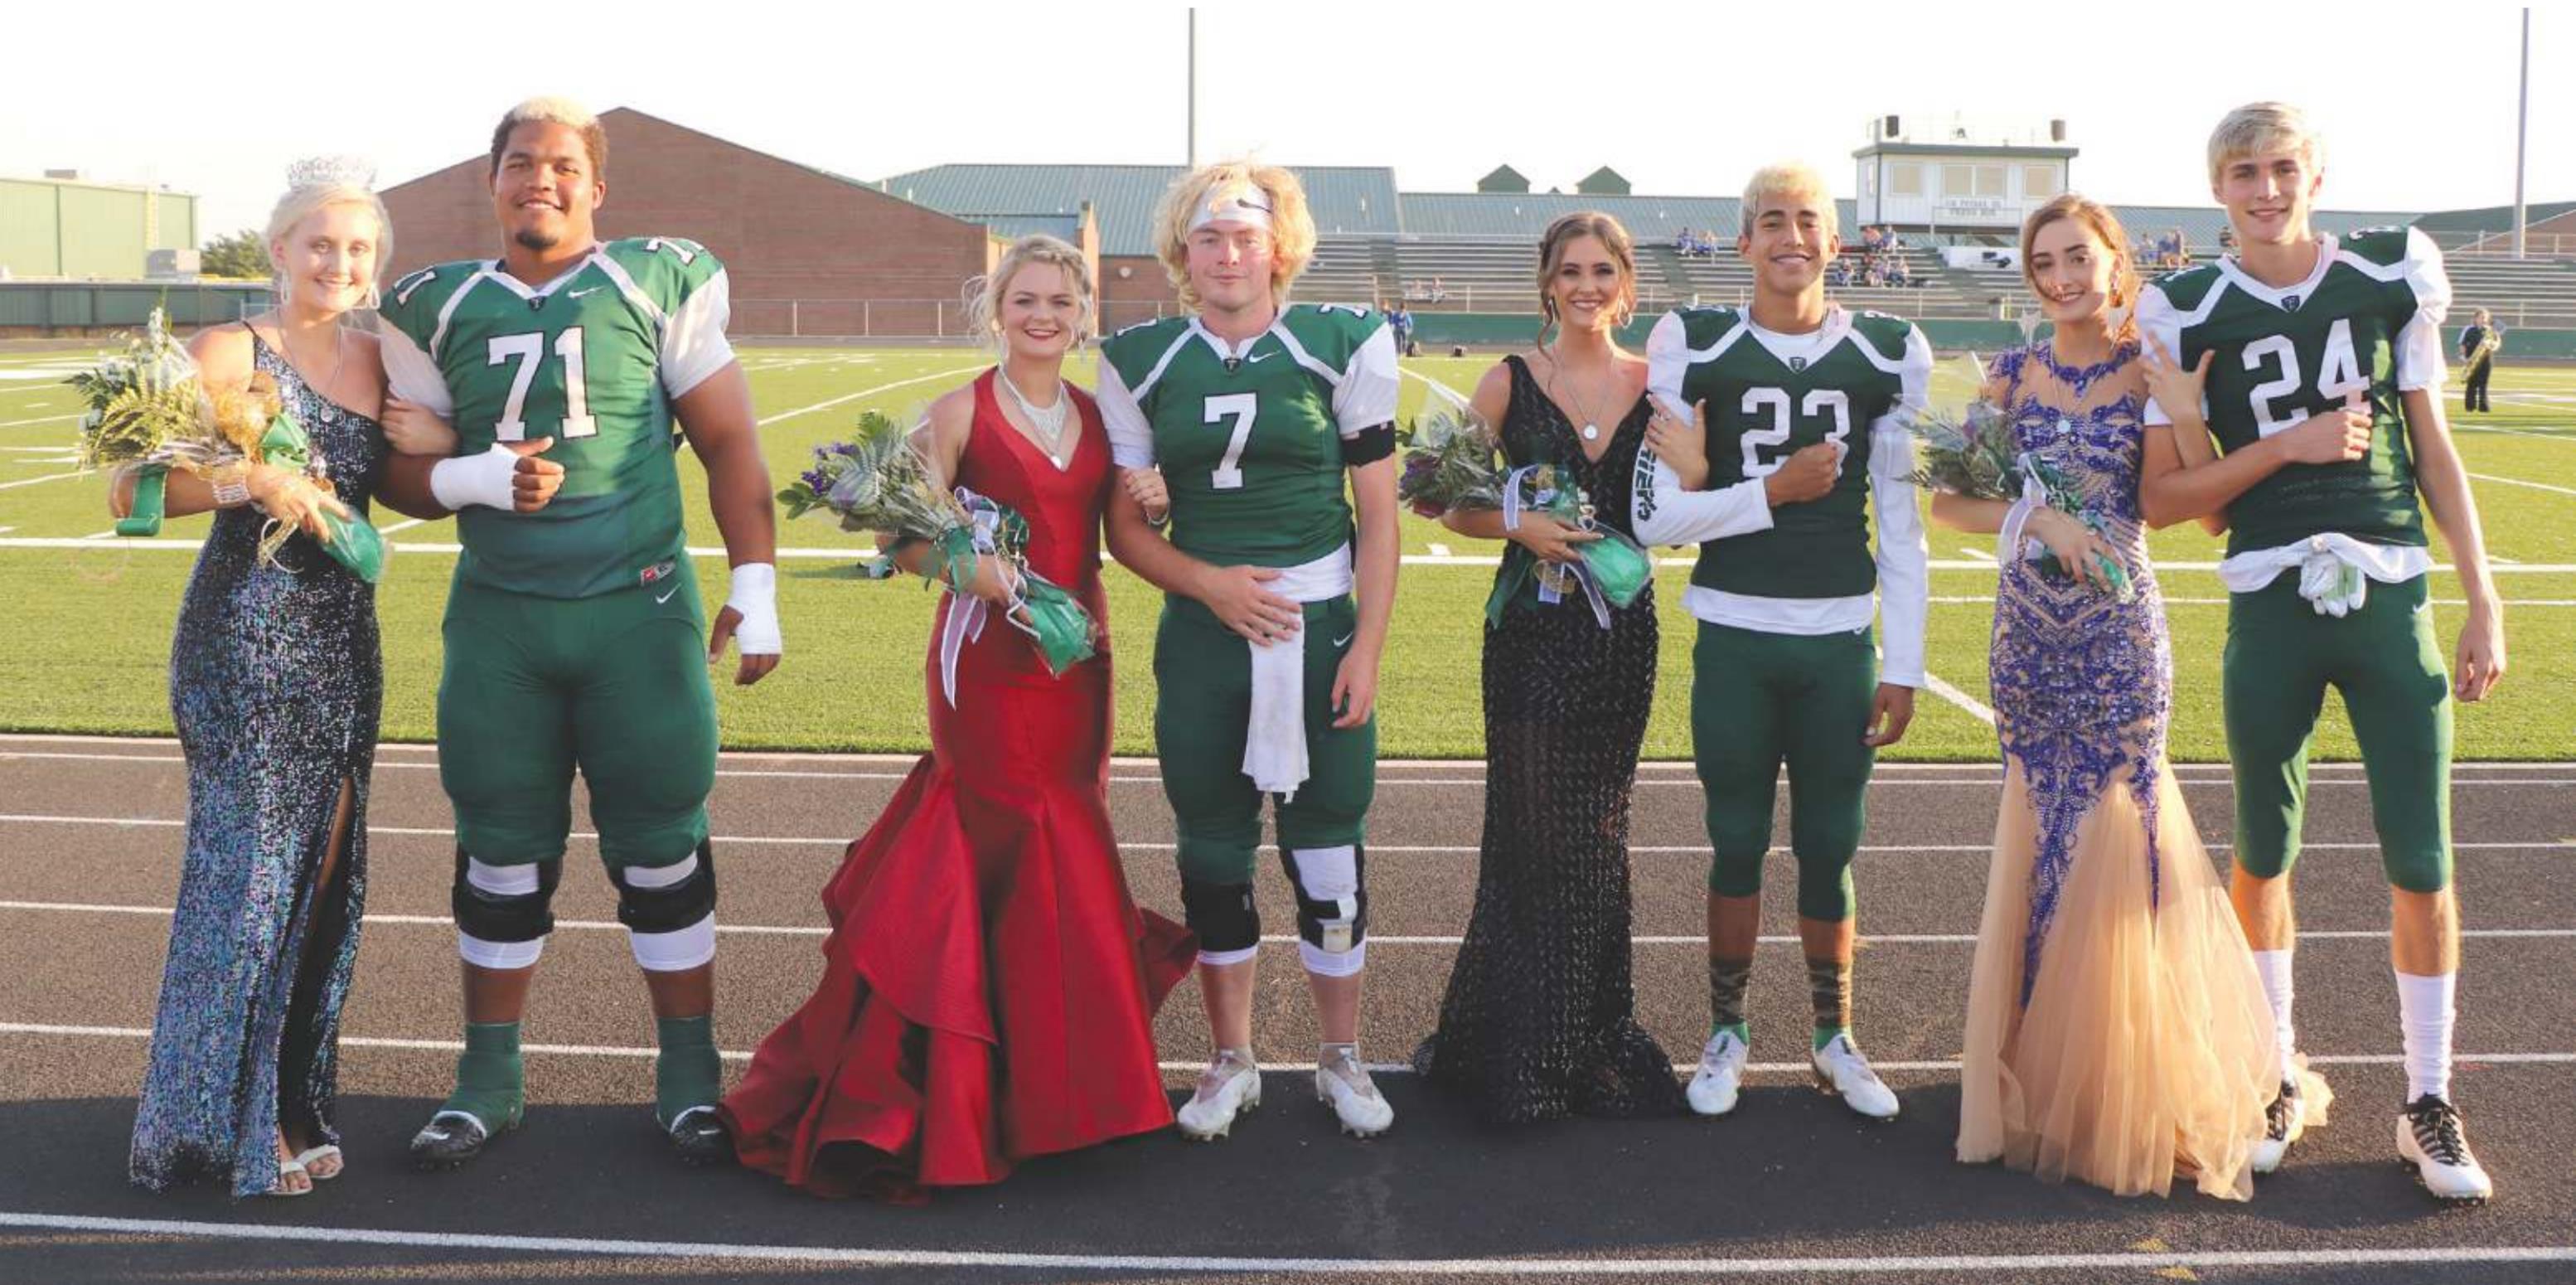 Photo by Tim Billy Pictured is the 2020 Fall Homecoming Court. From left is Katelyn Jones, Aden Kelley, Abby Payne, Jaxon Ward, Kiersten Yoder, Ethan Hamberlin, Shaylee Maddox and Jaxen Mannering. Jones was named Homecoming Queen and Kelley was named Homecoming King.